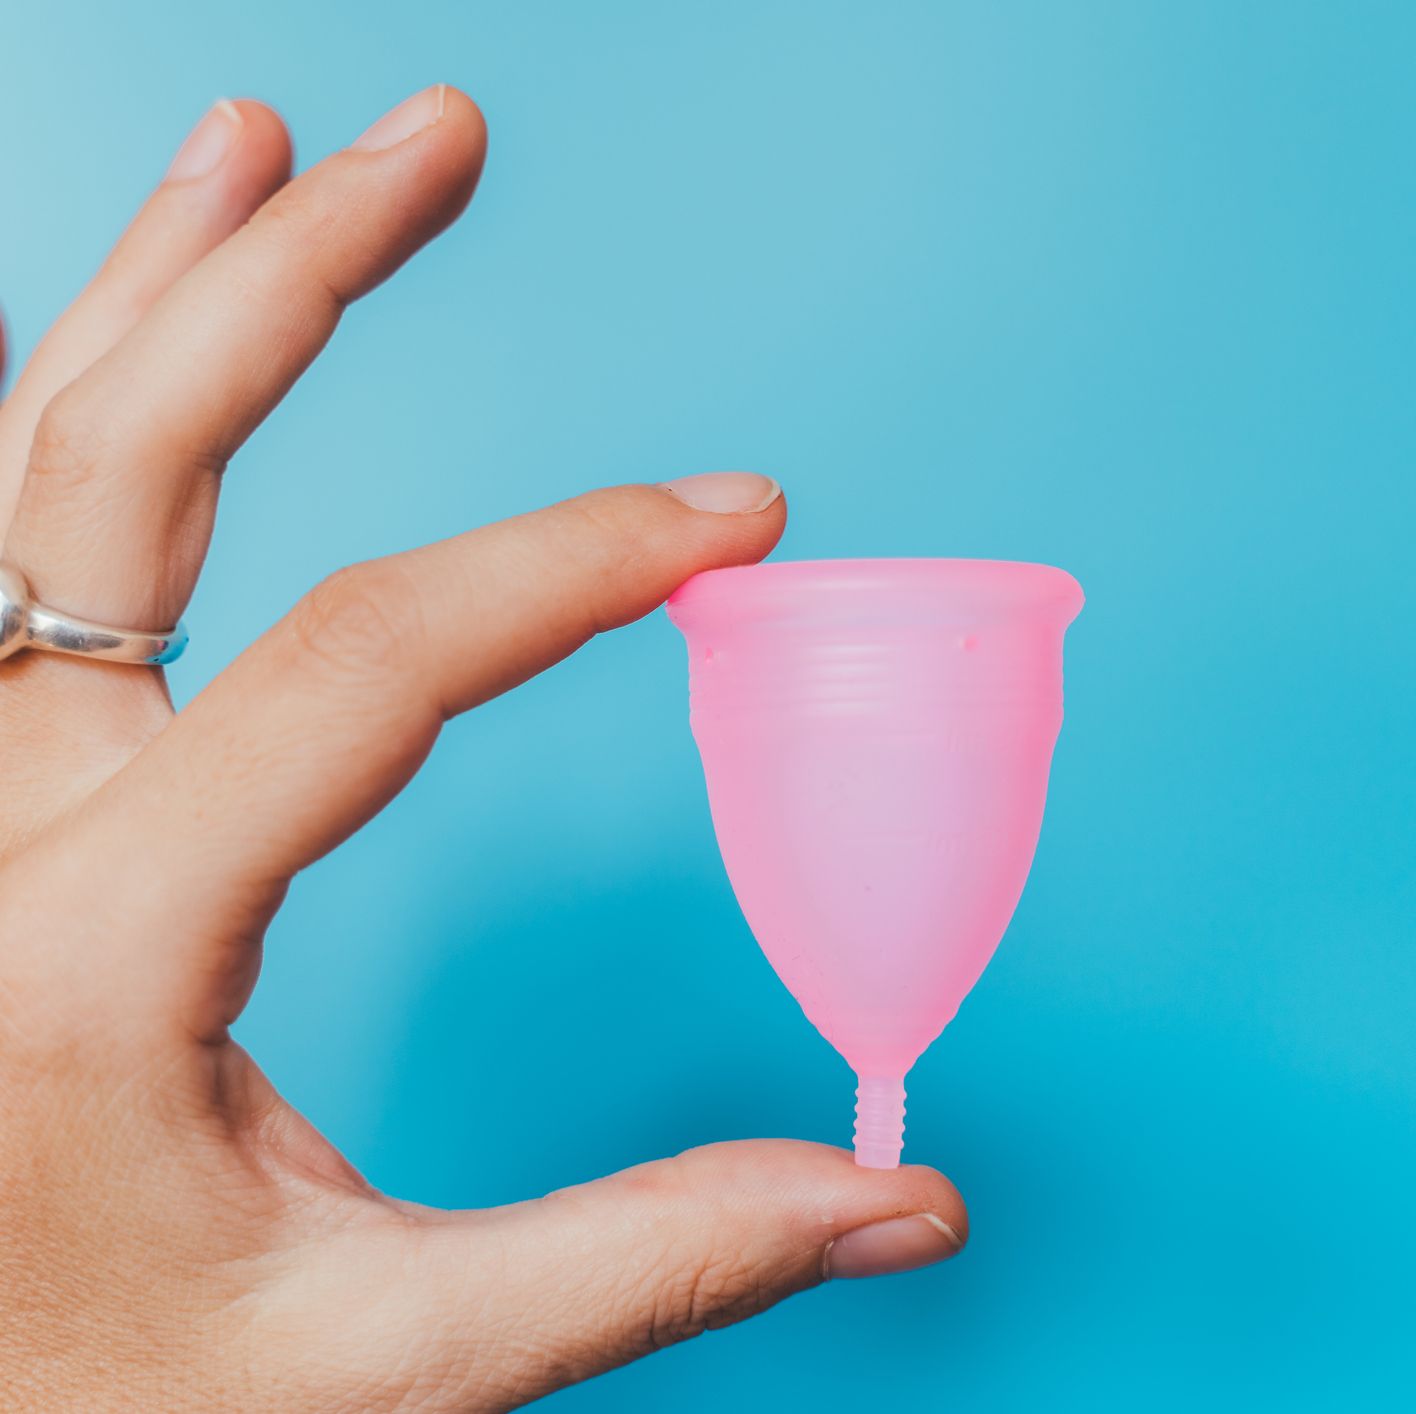 A woman contracted toxic shock syndrome from her menstrual cup